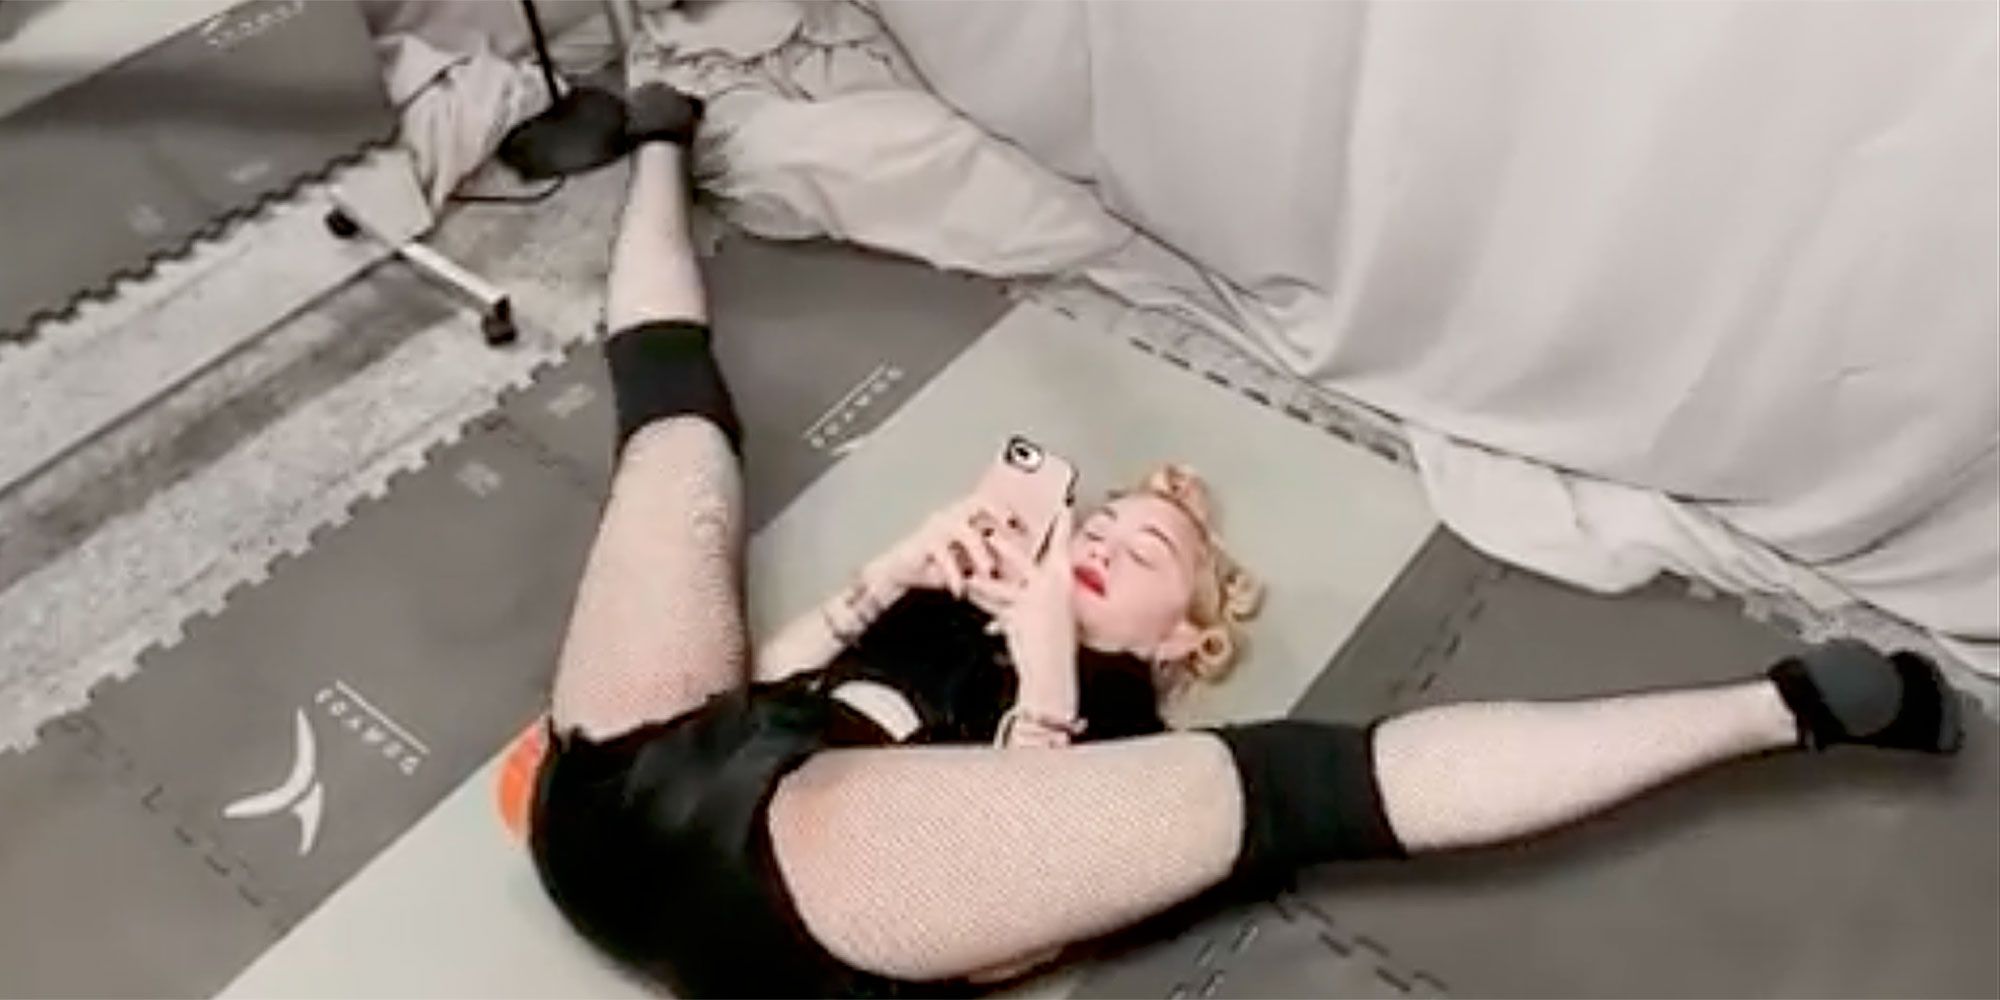 Madonna, 63, Shows Off Butt And Legs In